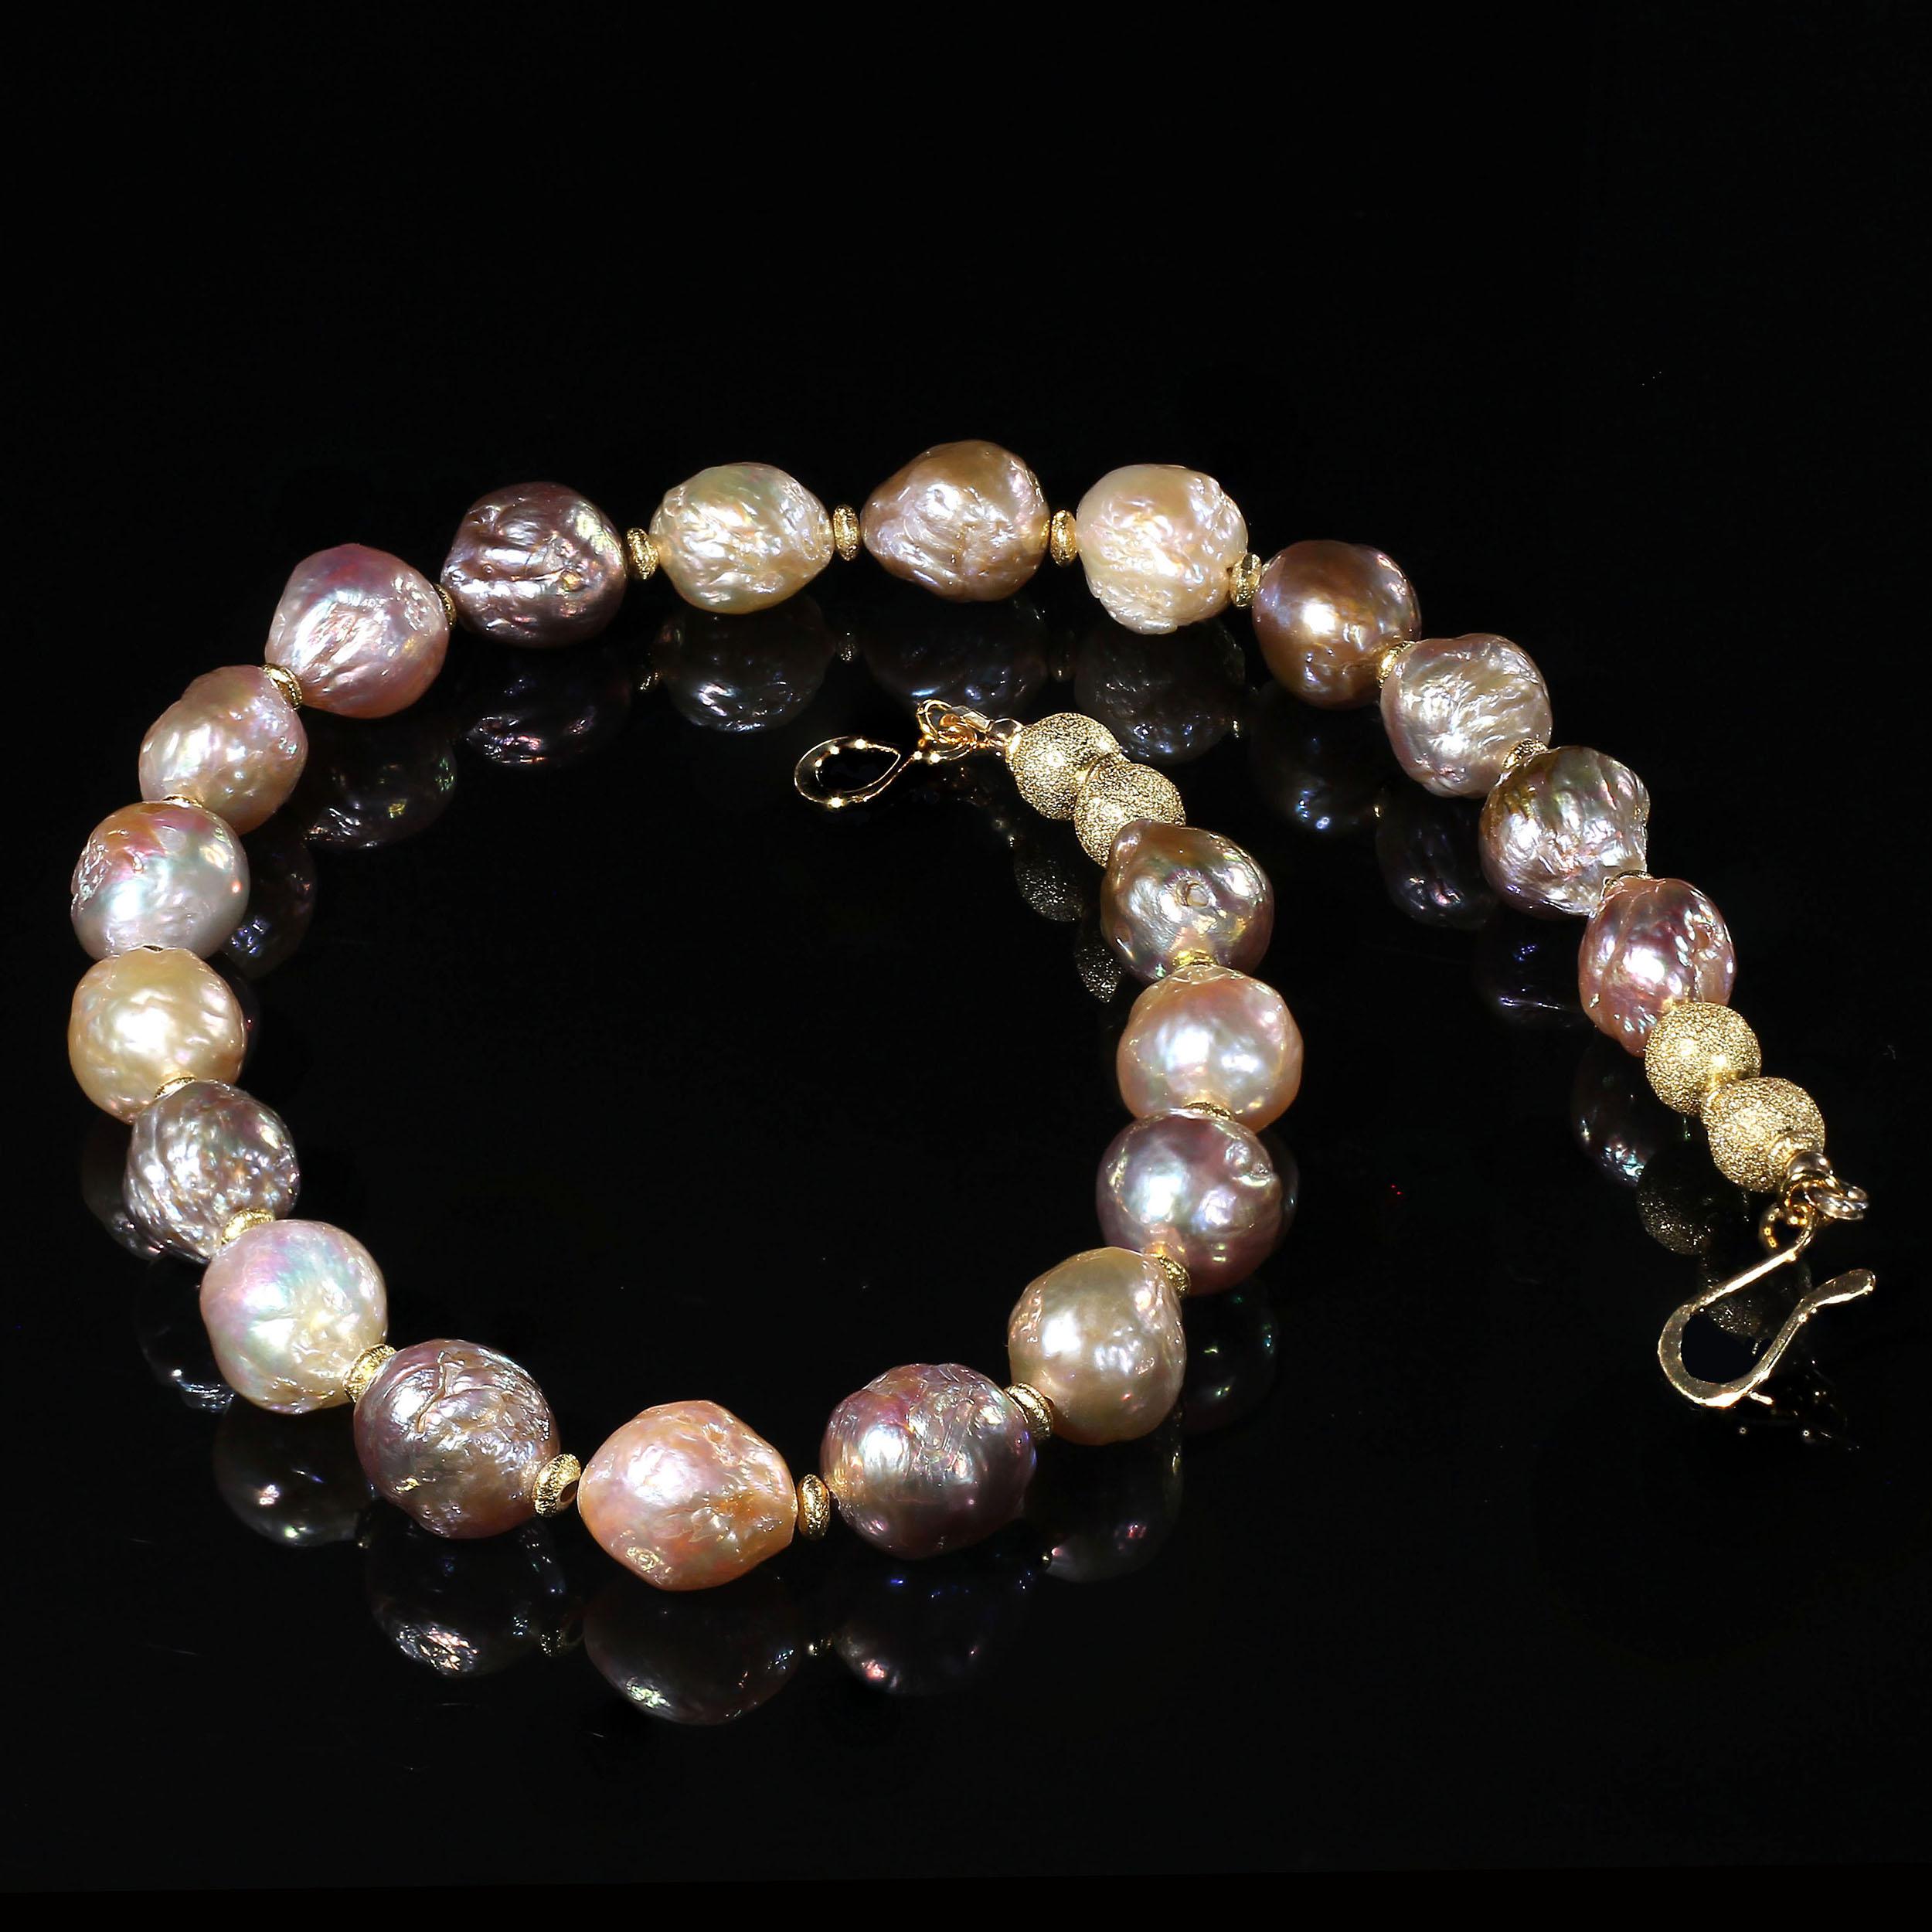 Baroque Pearl Choker Necklace in Natural Multi Tones with tiny gold tone accents with bring out the goldy color and iridescent shades.  This unique necklace is a 15 inch choker length and secured with a smooth shiny 14K gold vermeil hook and eye.